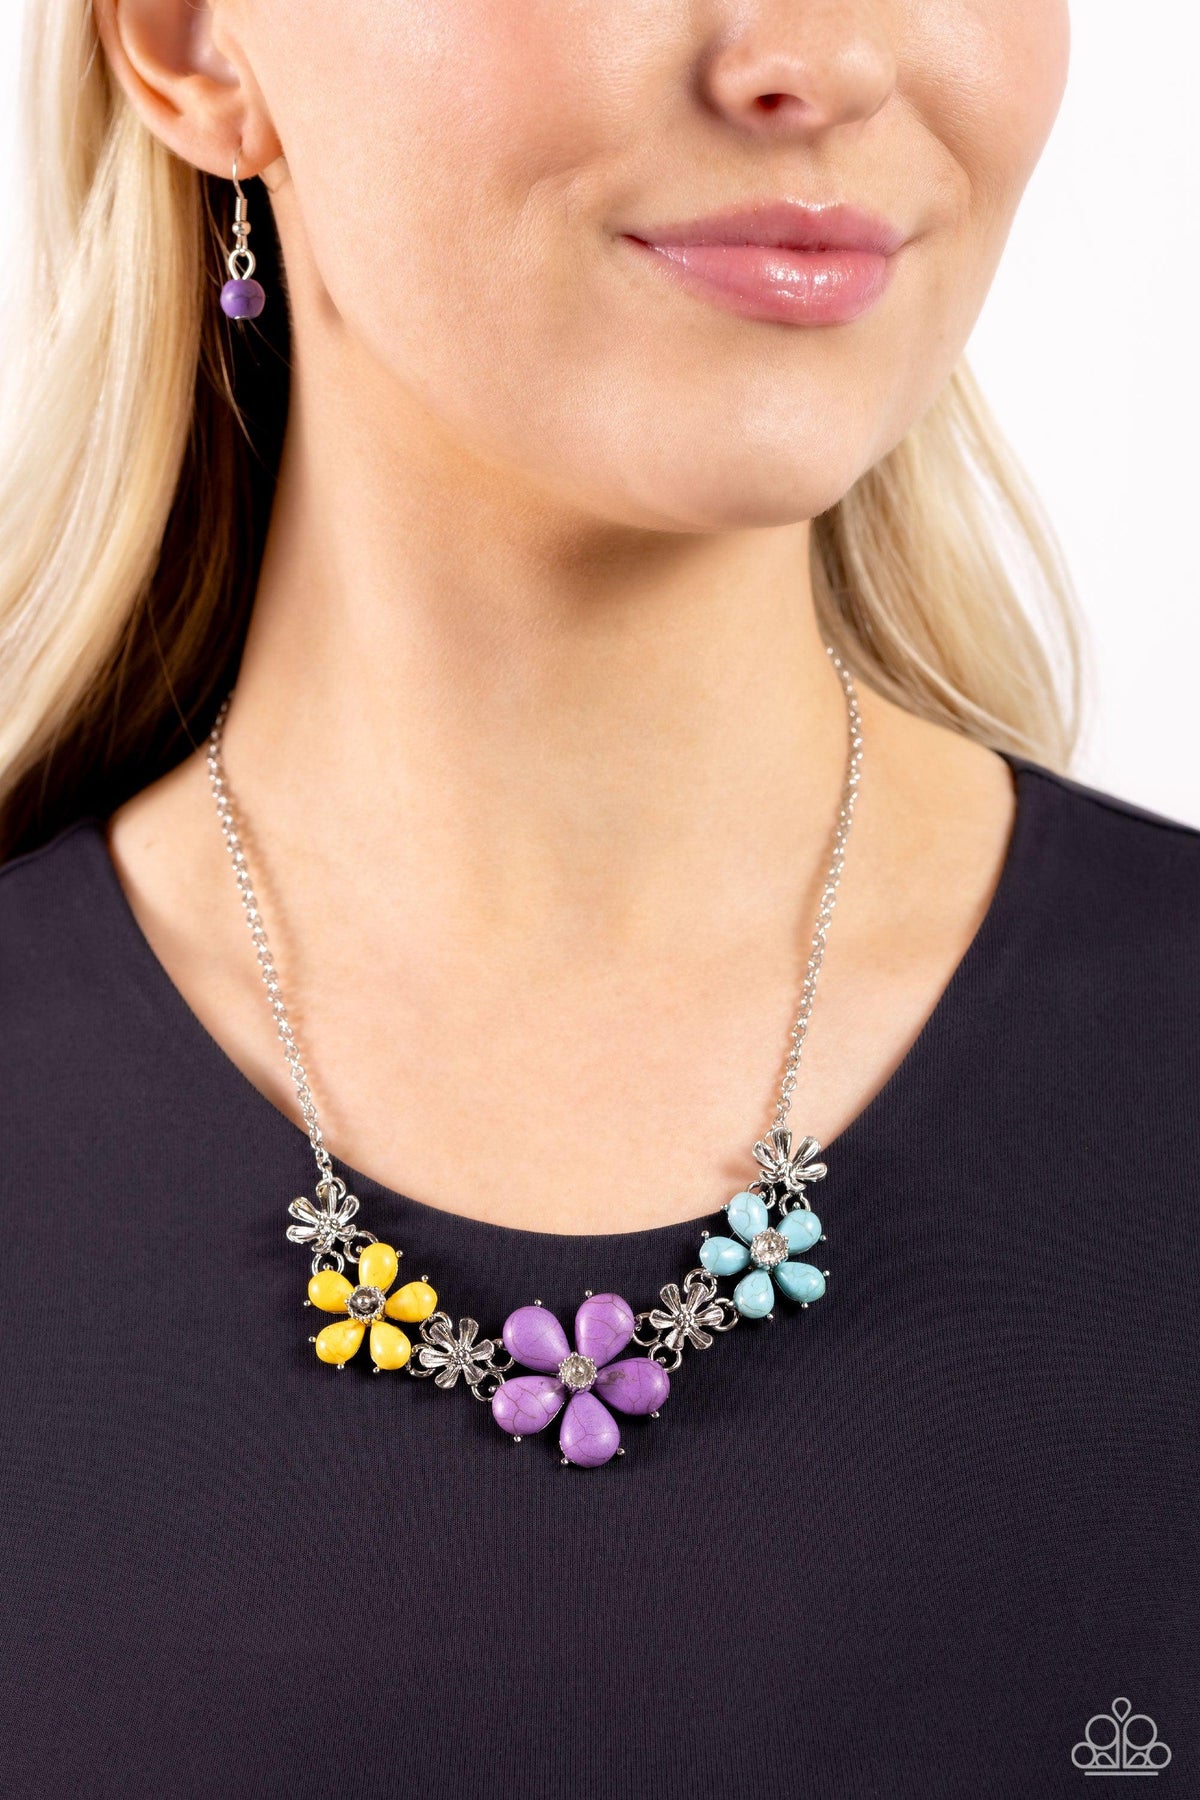 Growing Garland Purple &amp; Multi Stone Floral Necklace - Paparazzi Accessories-on model - CarasShop.com - $5 Jewelry by Cara Jewels